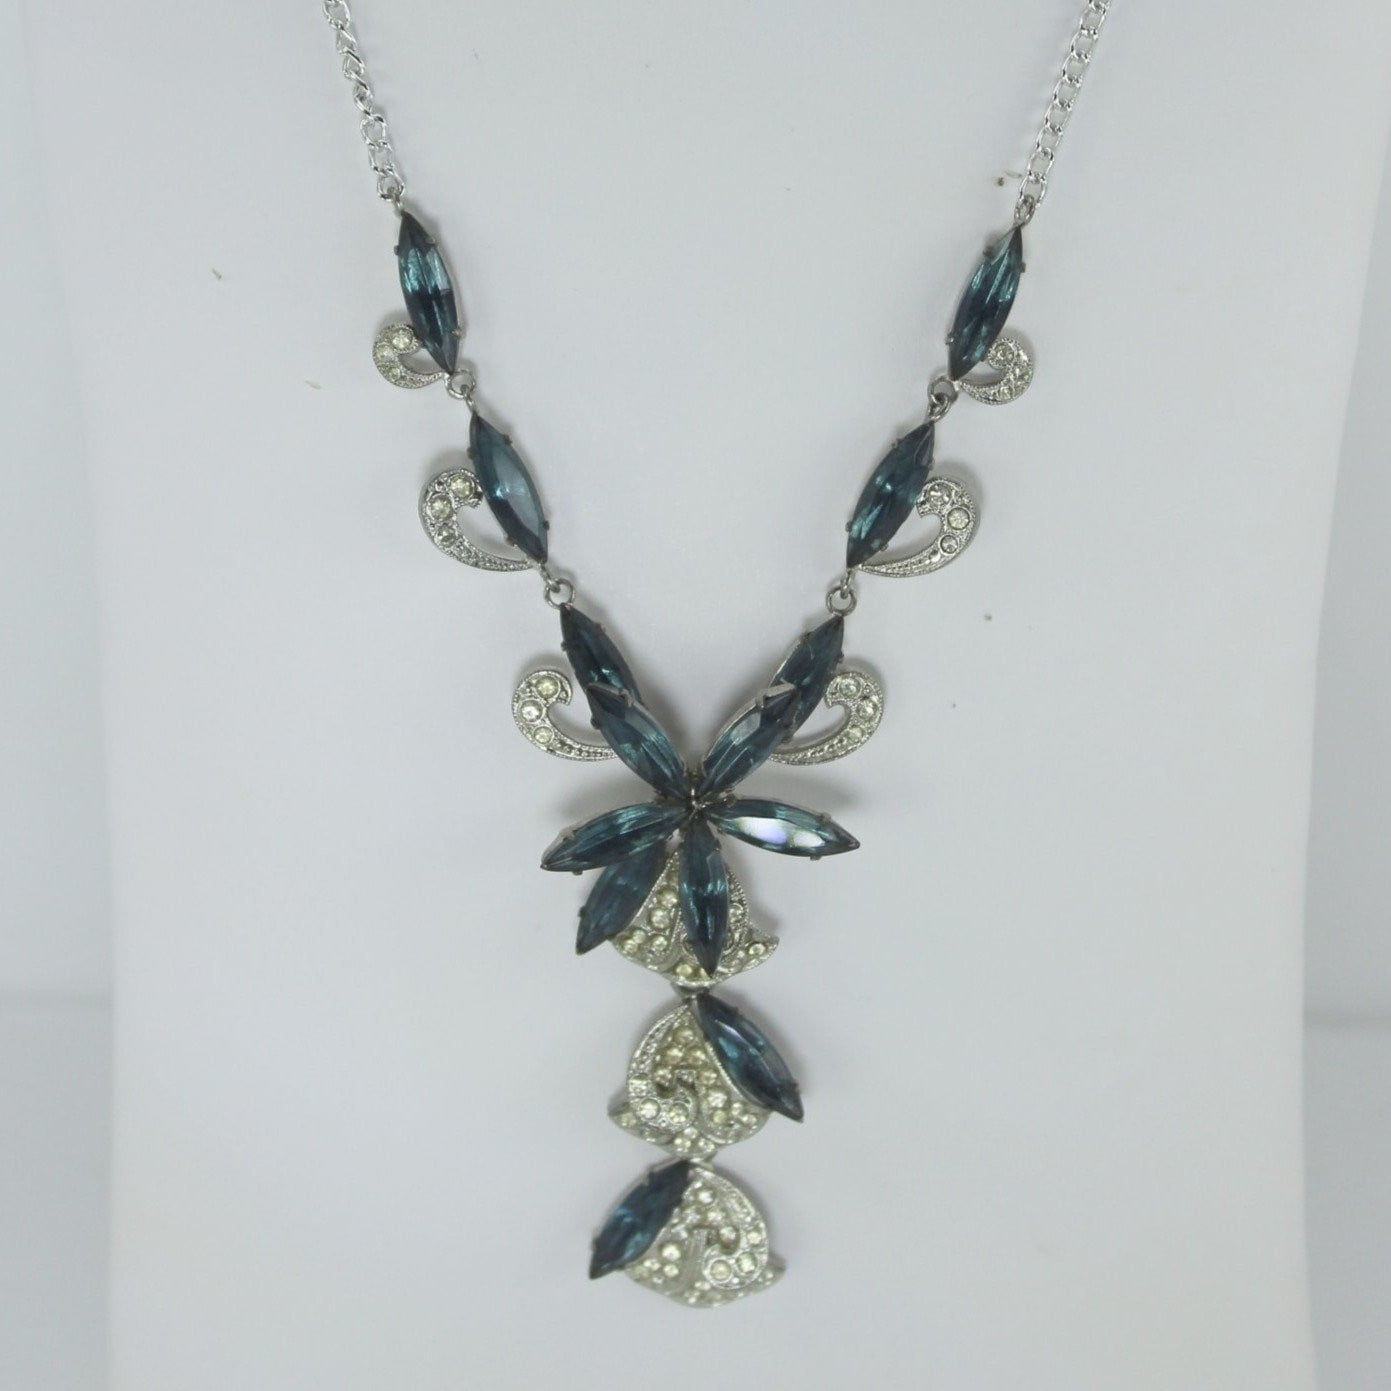 Stunning Lavalier Necklace Blue and Clear Glass Dimensional Lovely